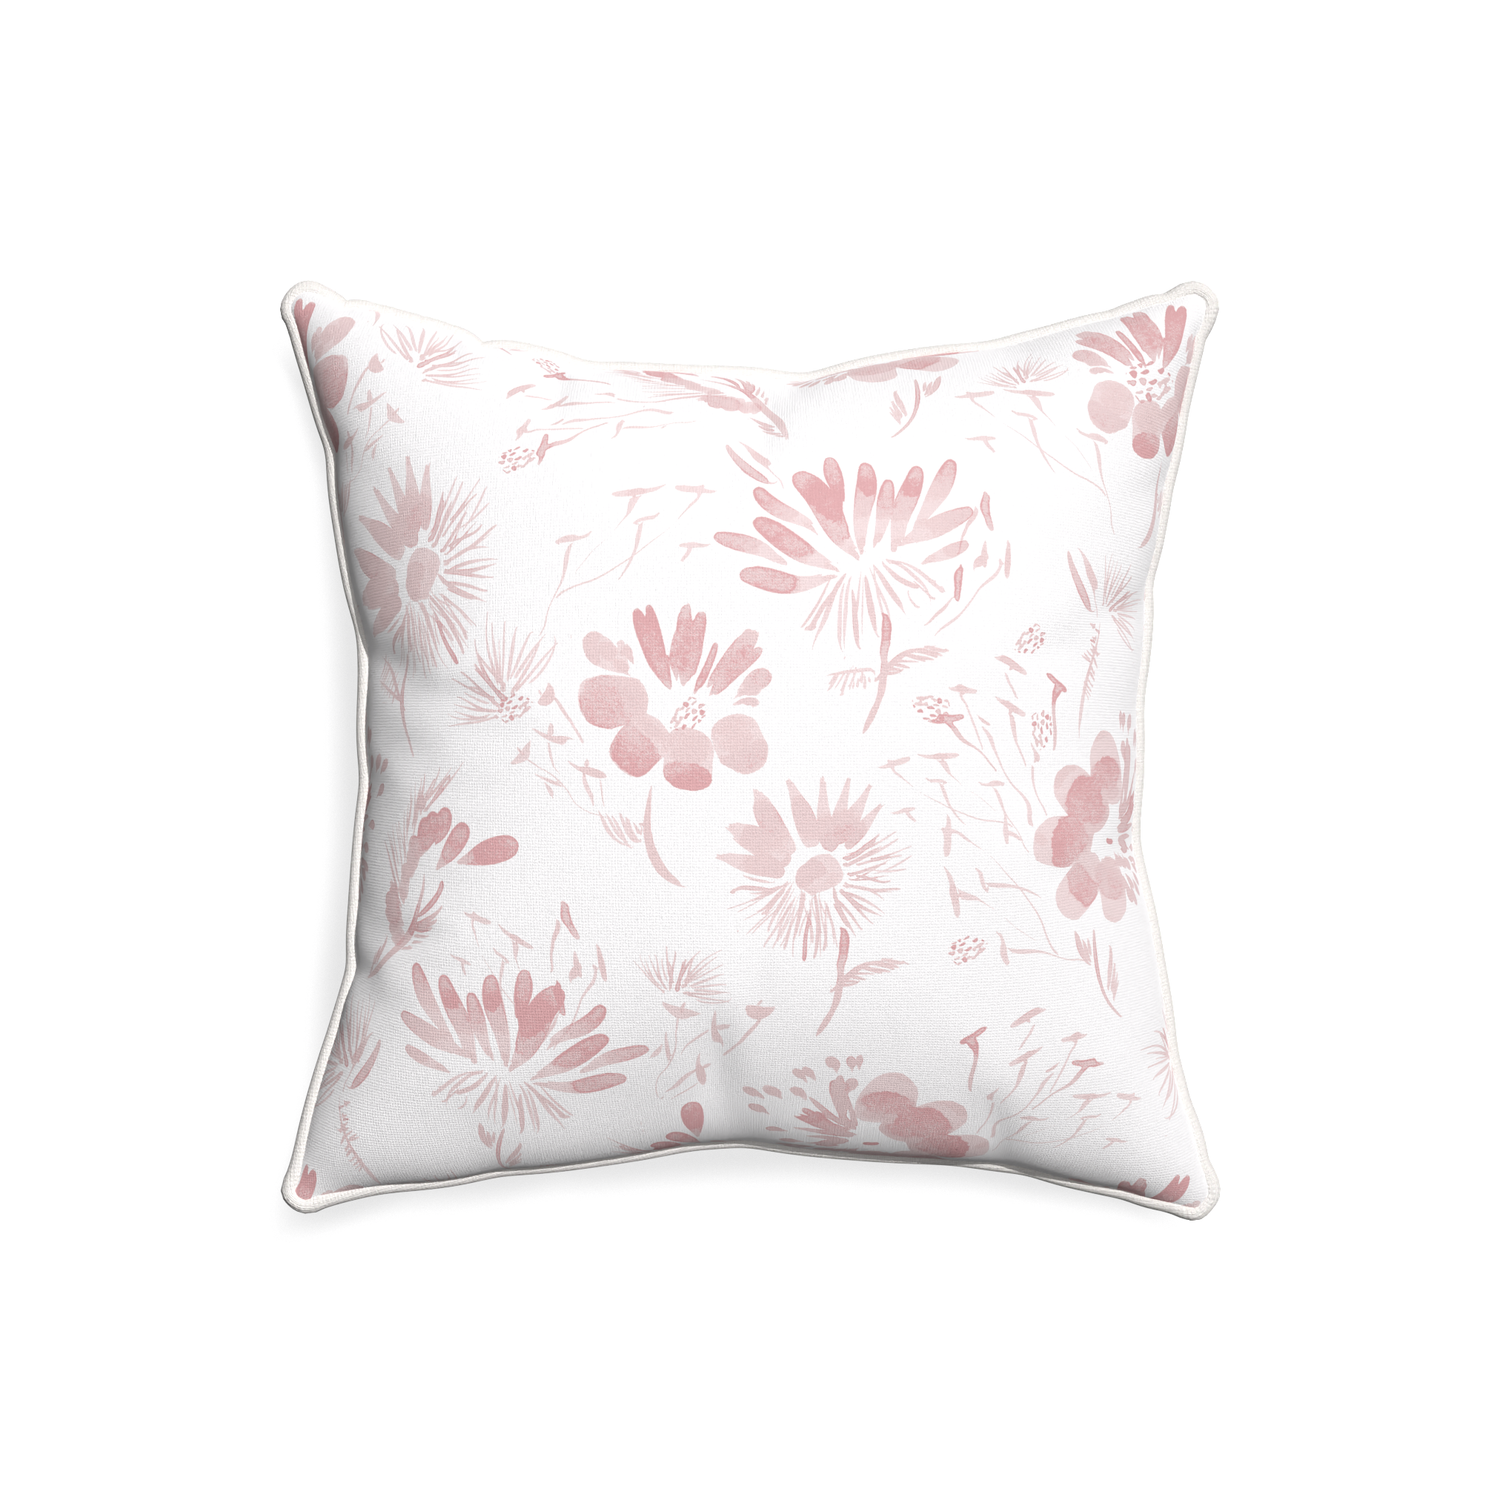 20-square blake custom pink floralpillow with snow piping on white background